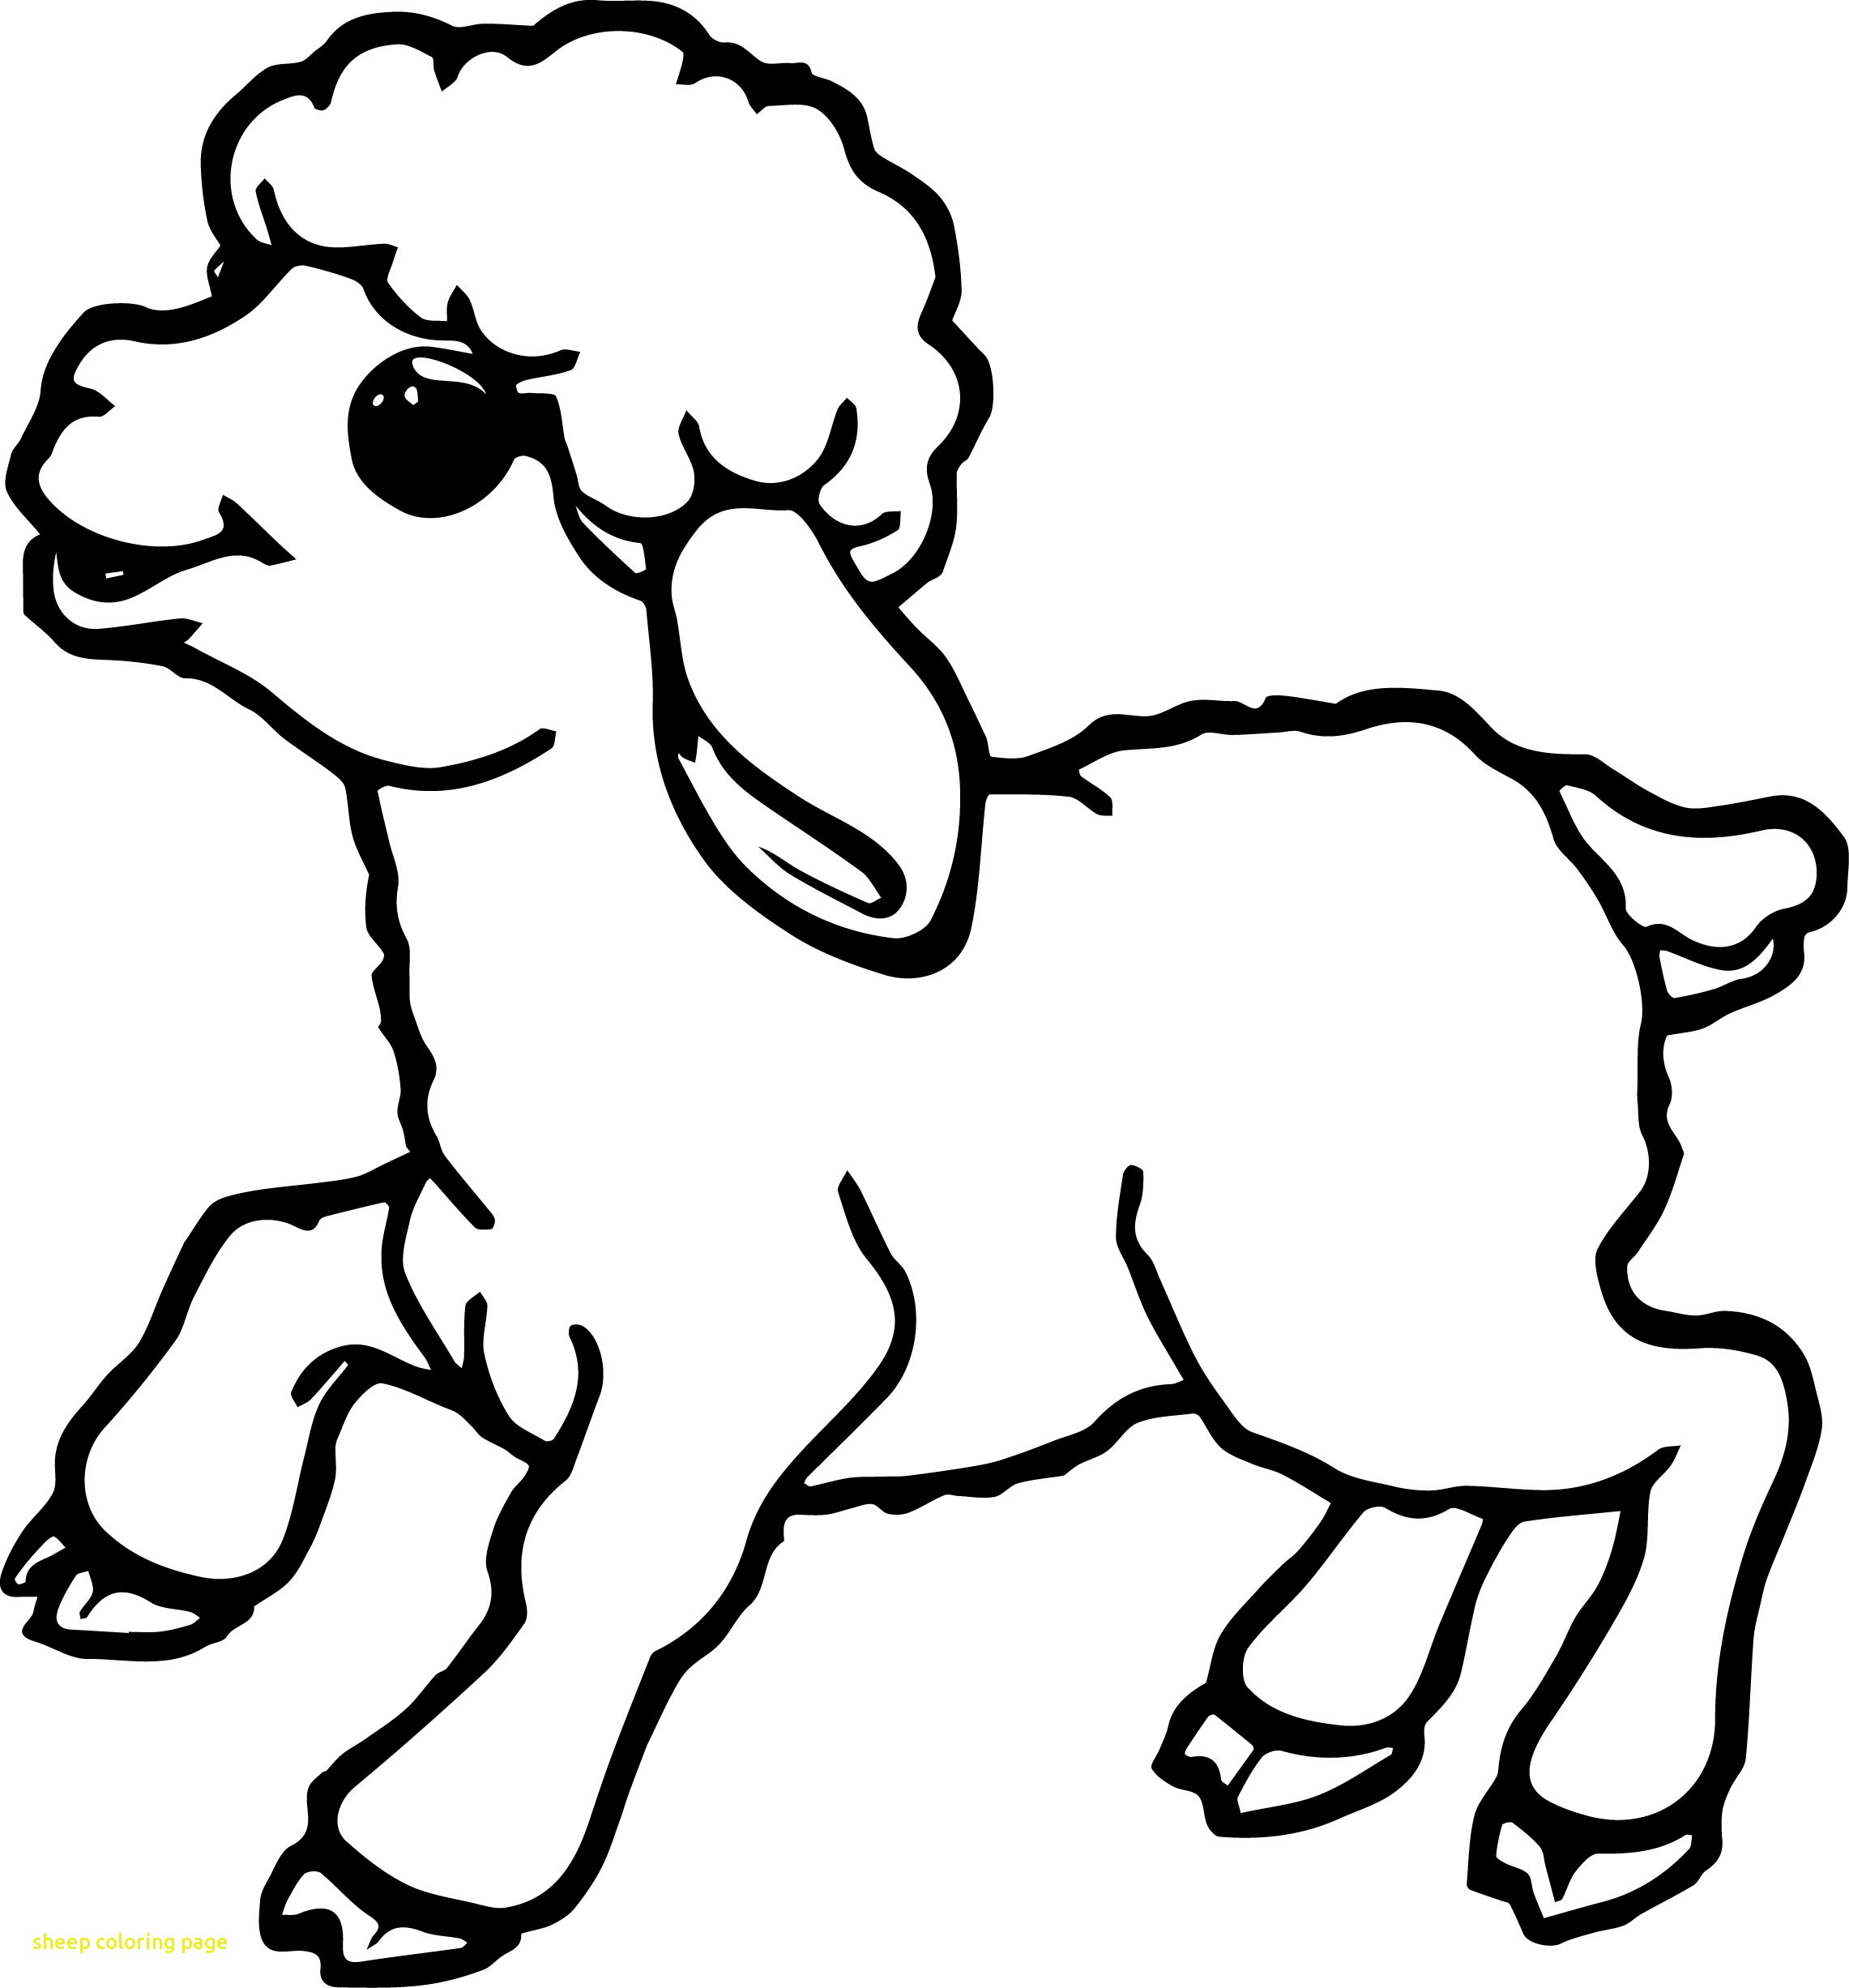 Sheep Coloring Page | Teamshania : Content Coloring Pages For - Free Printable Pictures Of Sheep